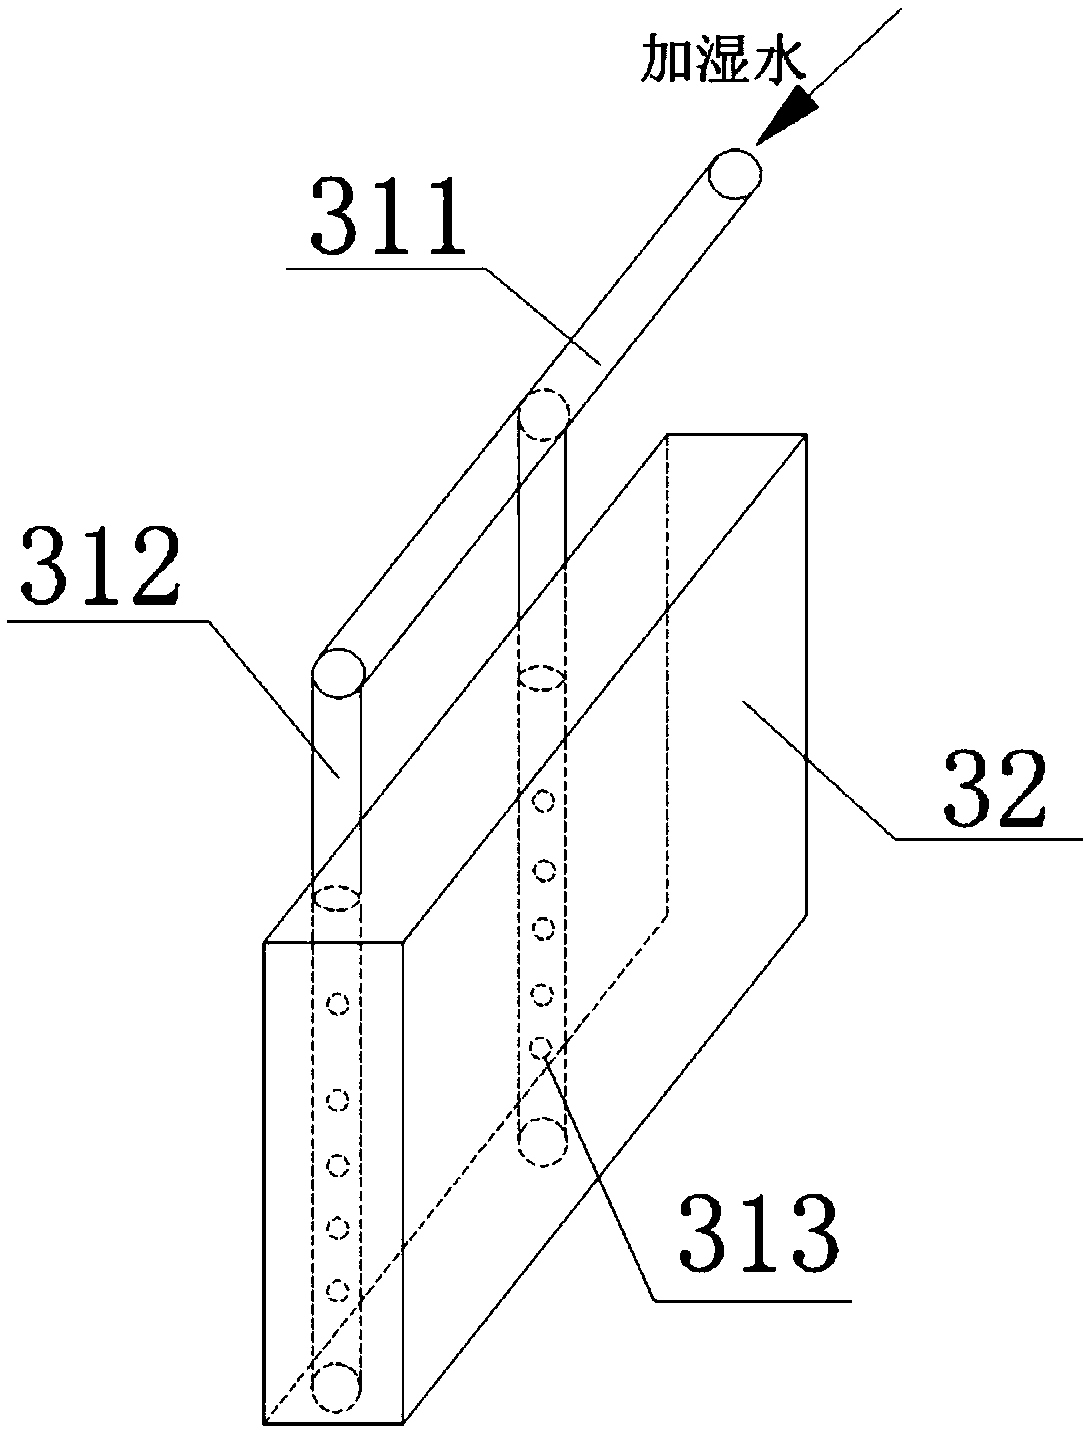 Powerless solar humidification system and method